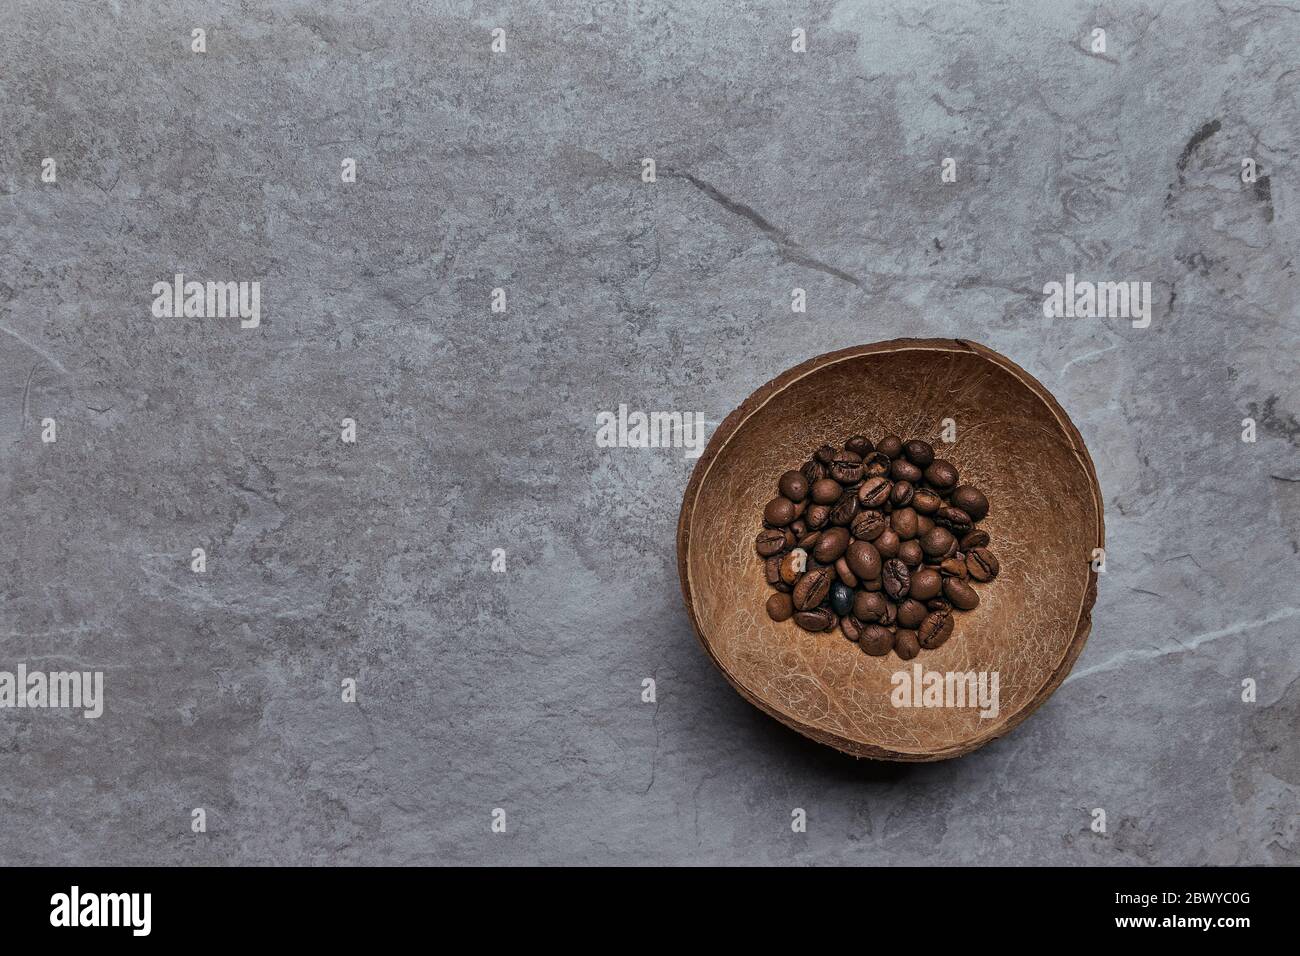 Overhead view of roasted coffee beans in coconut shell on rustic wooden background, Still life photography with roasted coffee beans Stock Photo